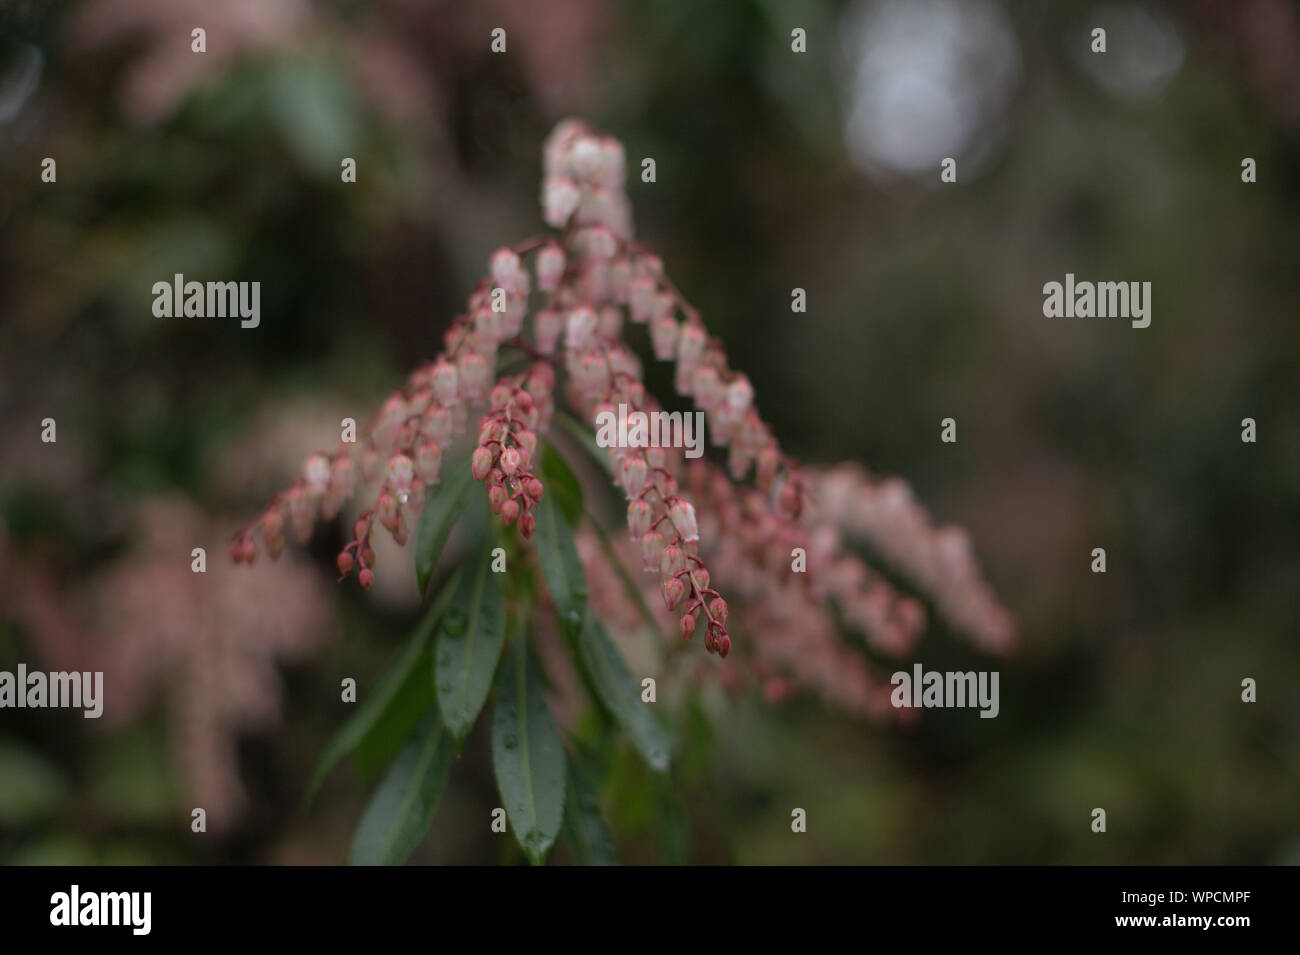 Closeup of clusters of pink Pieris japonica (Japanese andromeda) small bell-shaped flowers after the rain in Lithia park, in spring, Ashland, Oregon, Stock Photo